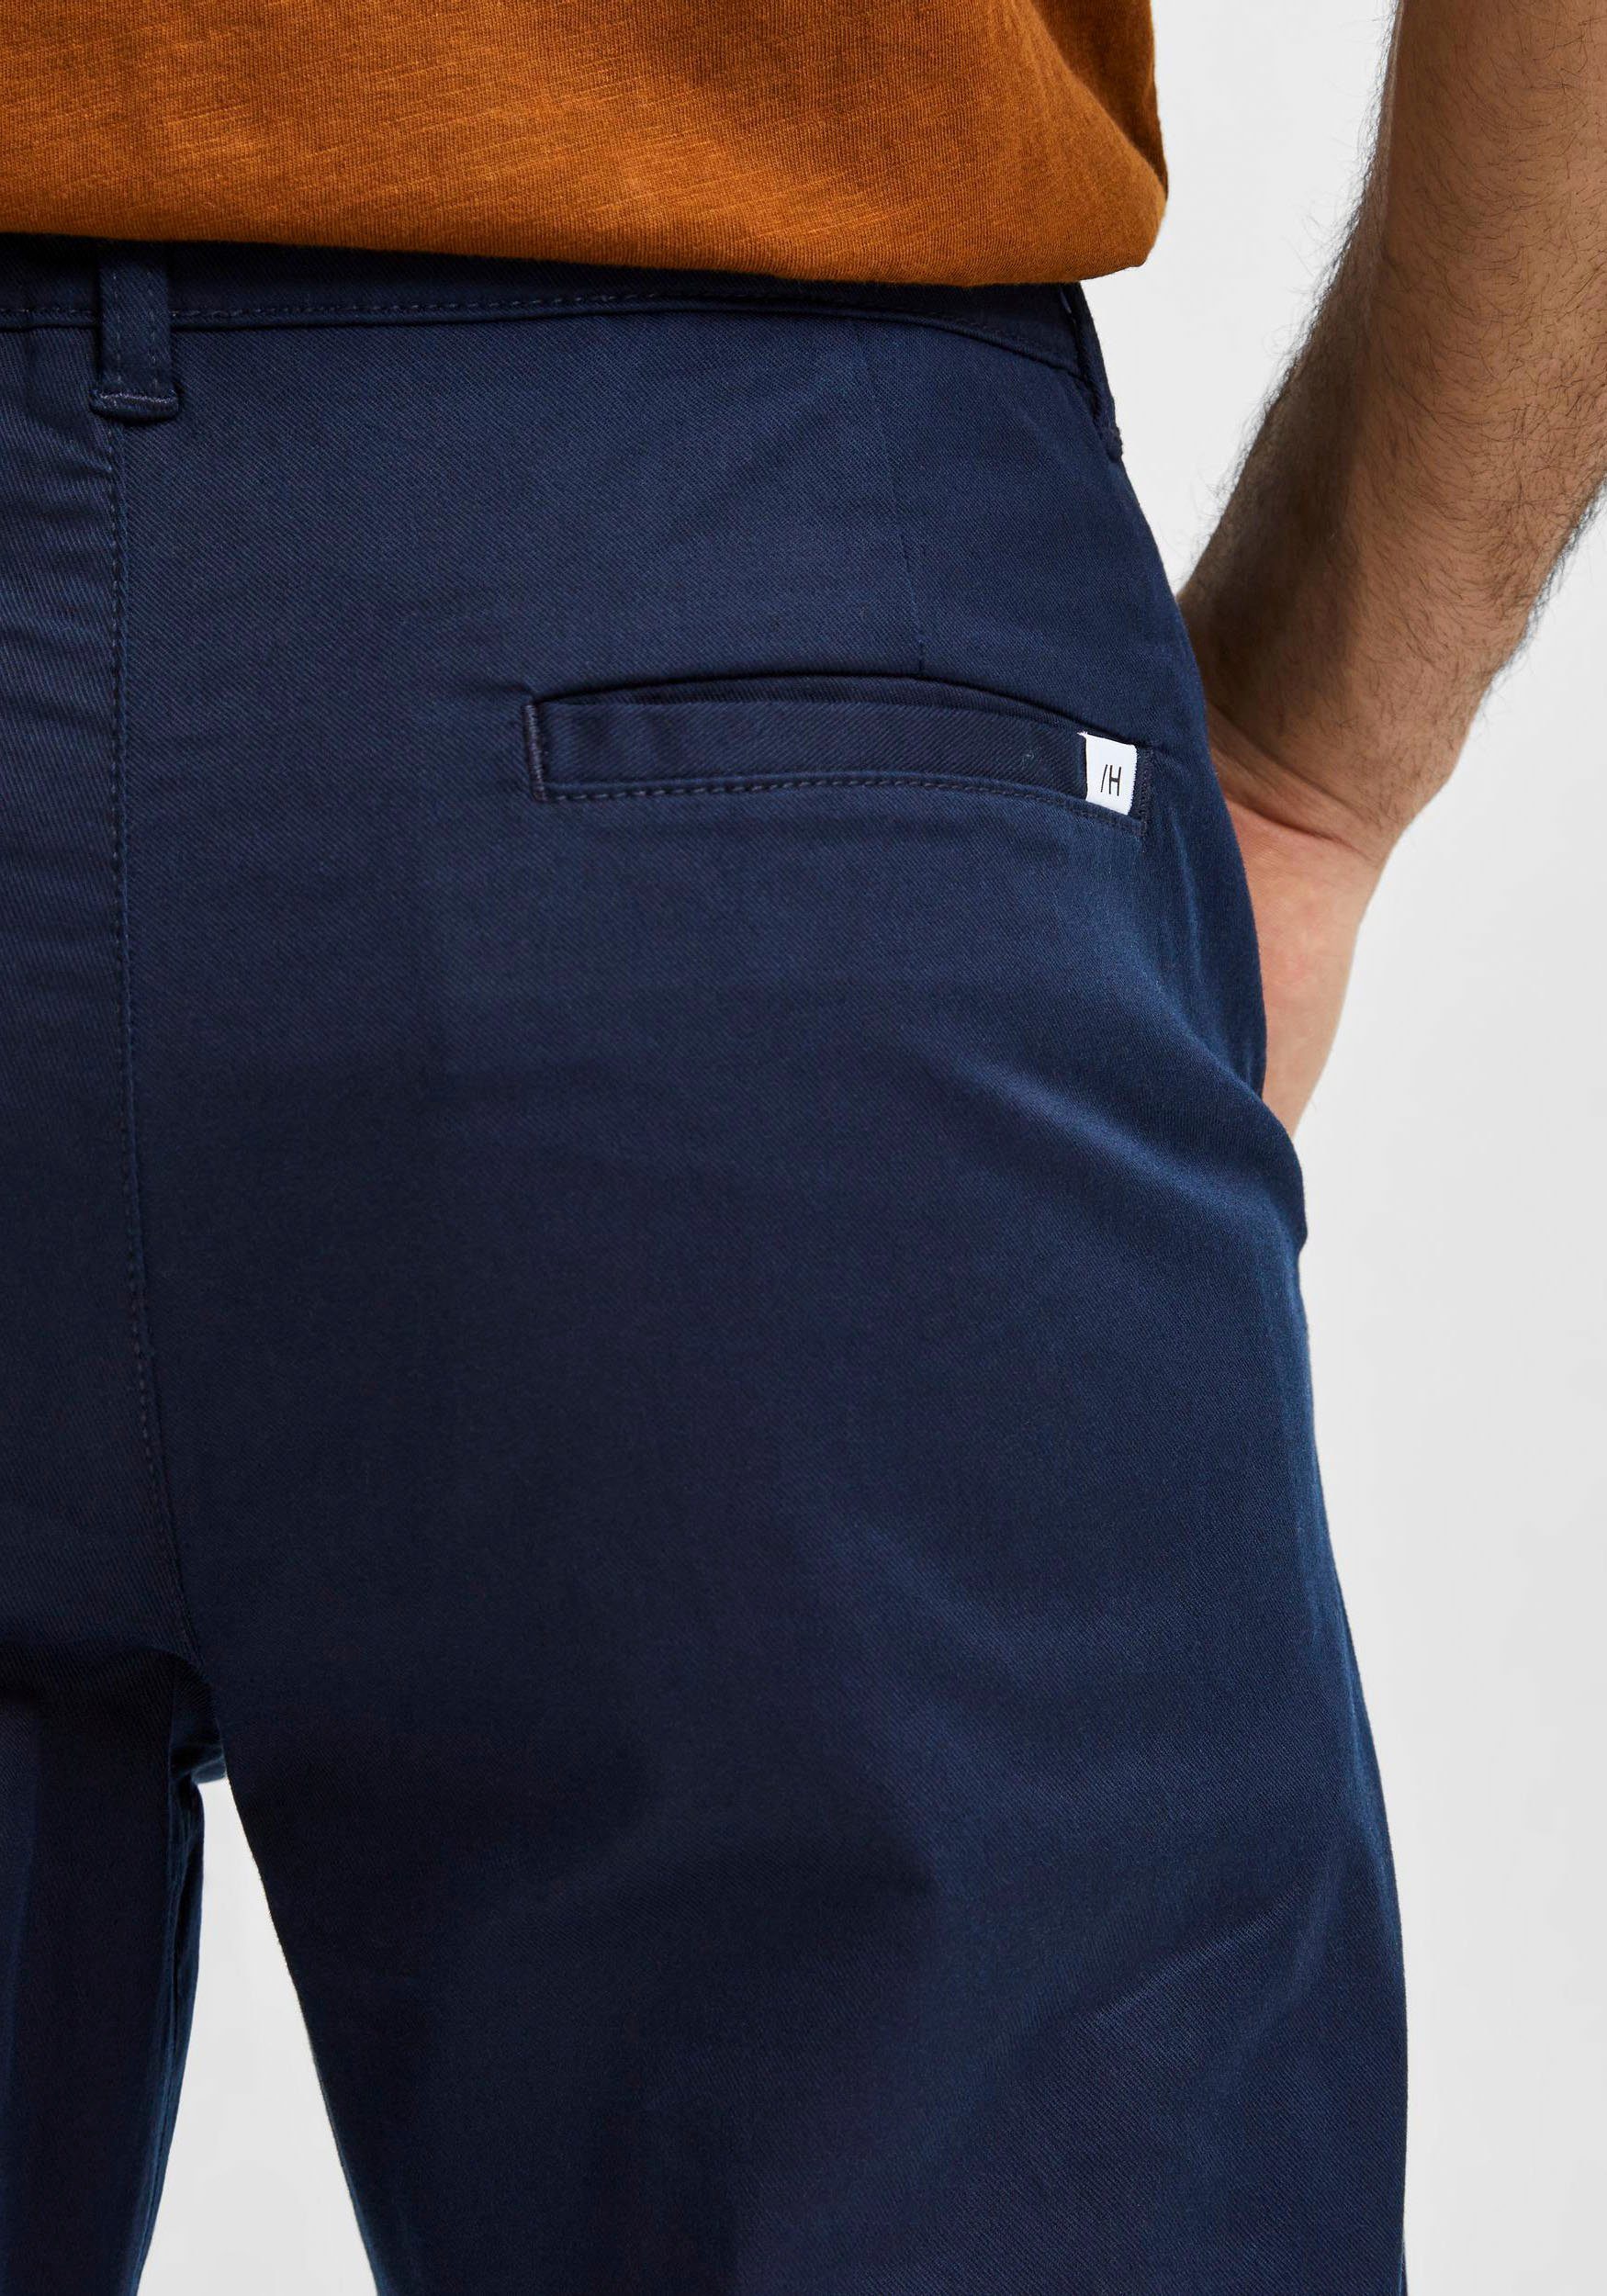 SE Chinohose Sapphire HOMME SELECTED Chino Dark